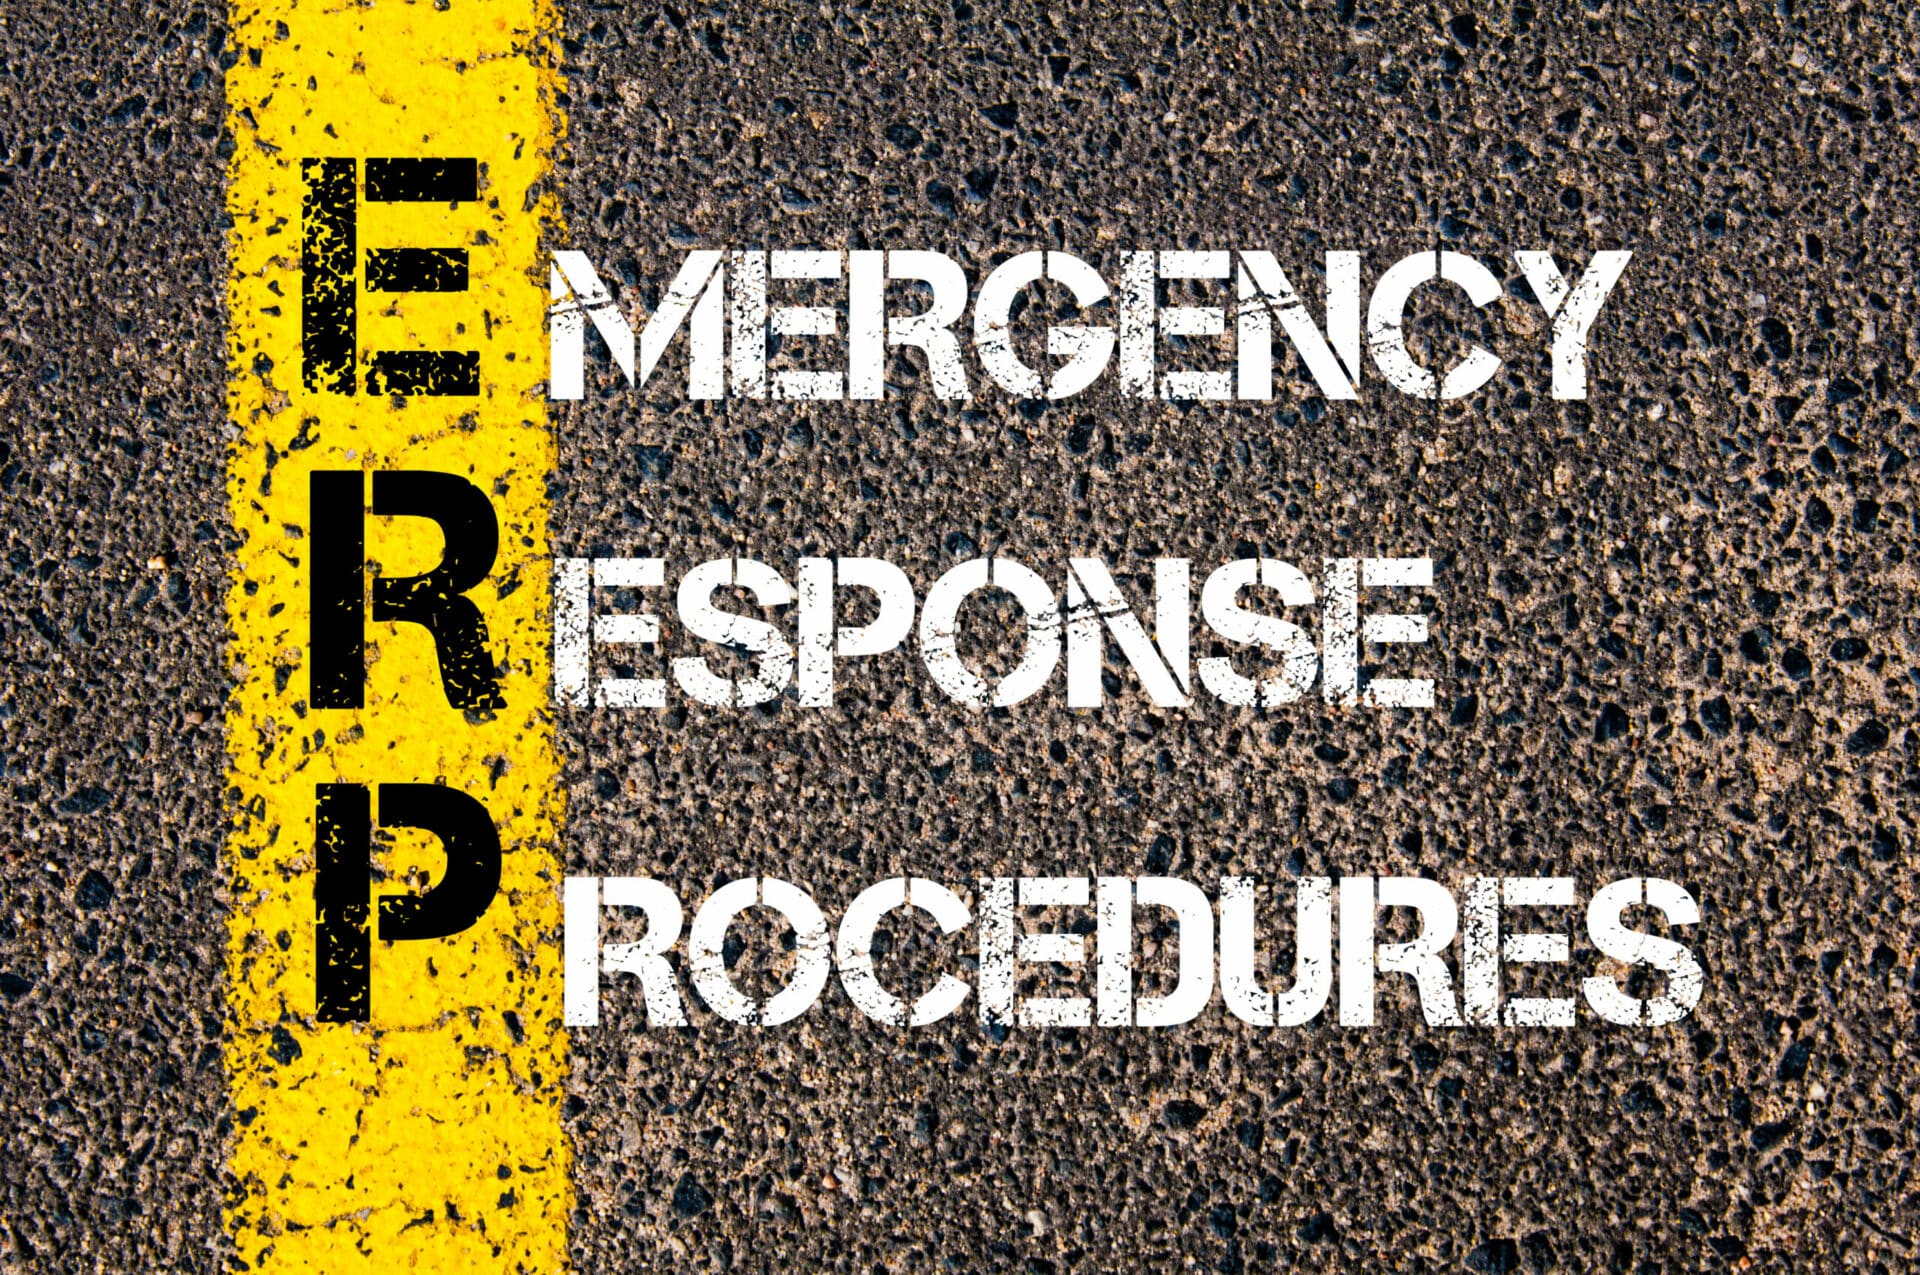 Text 'Emergency Response Procedures' painted in white over a yellow line on a textured asphalt surface, indicating safety protocols